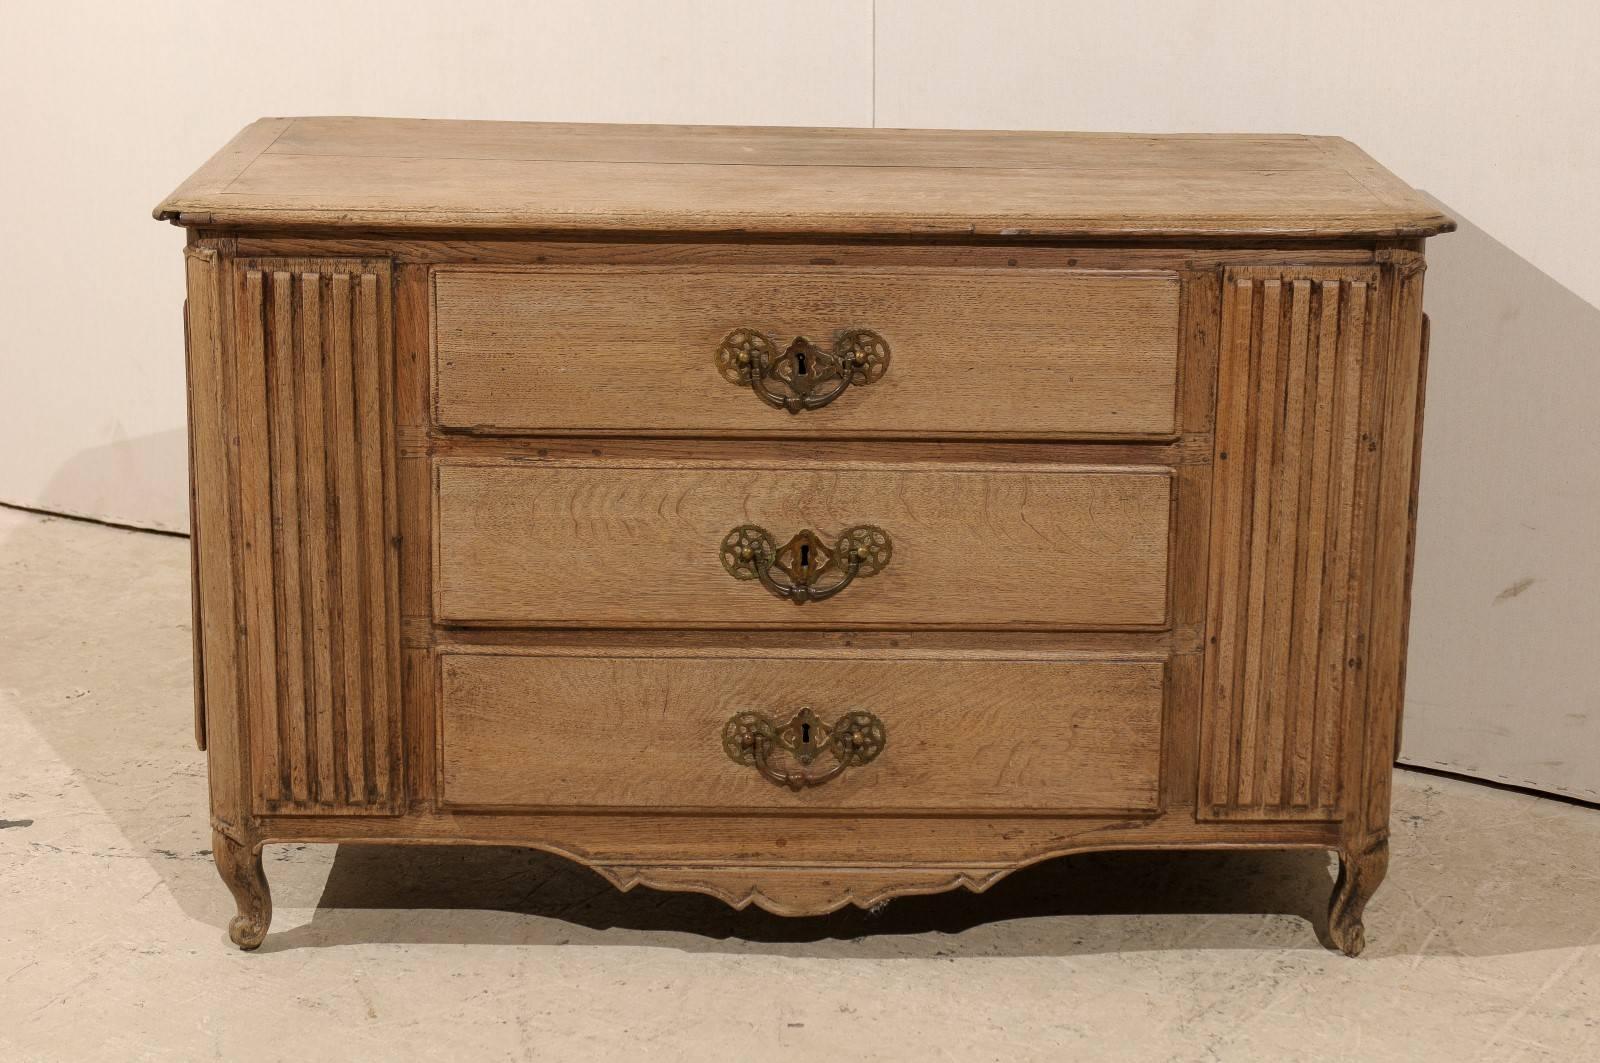 A wonderful French bleached-wood carved chest of drawers from the 18th century. This antique commode from France features three front drawers flanked within wide set, reed carved panels.  Each side panel of this chest has been fitted with a door for